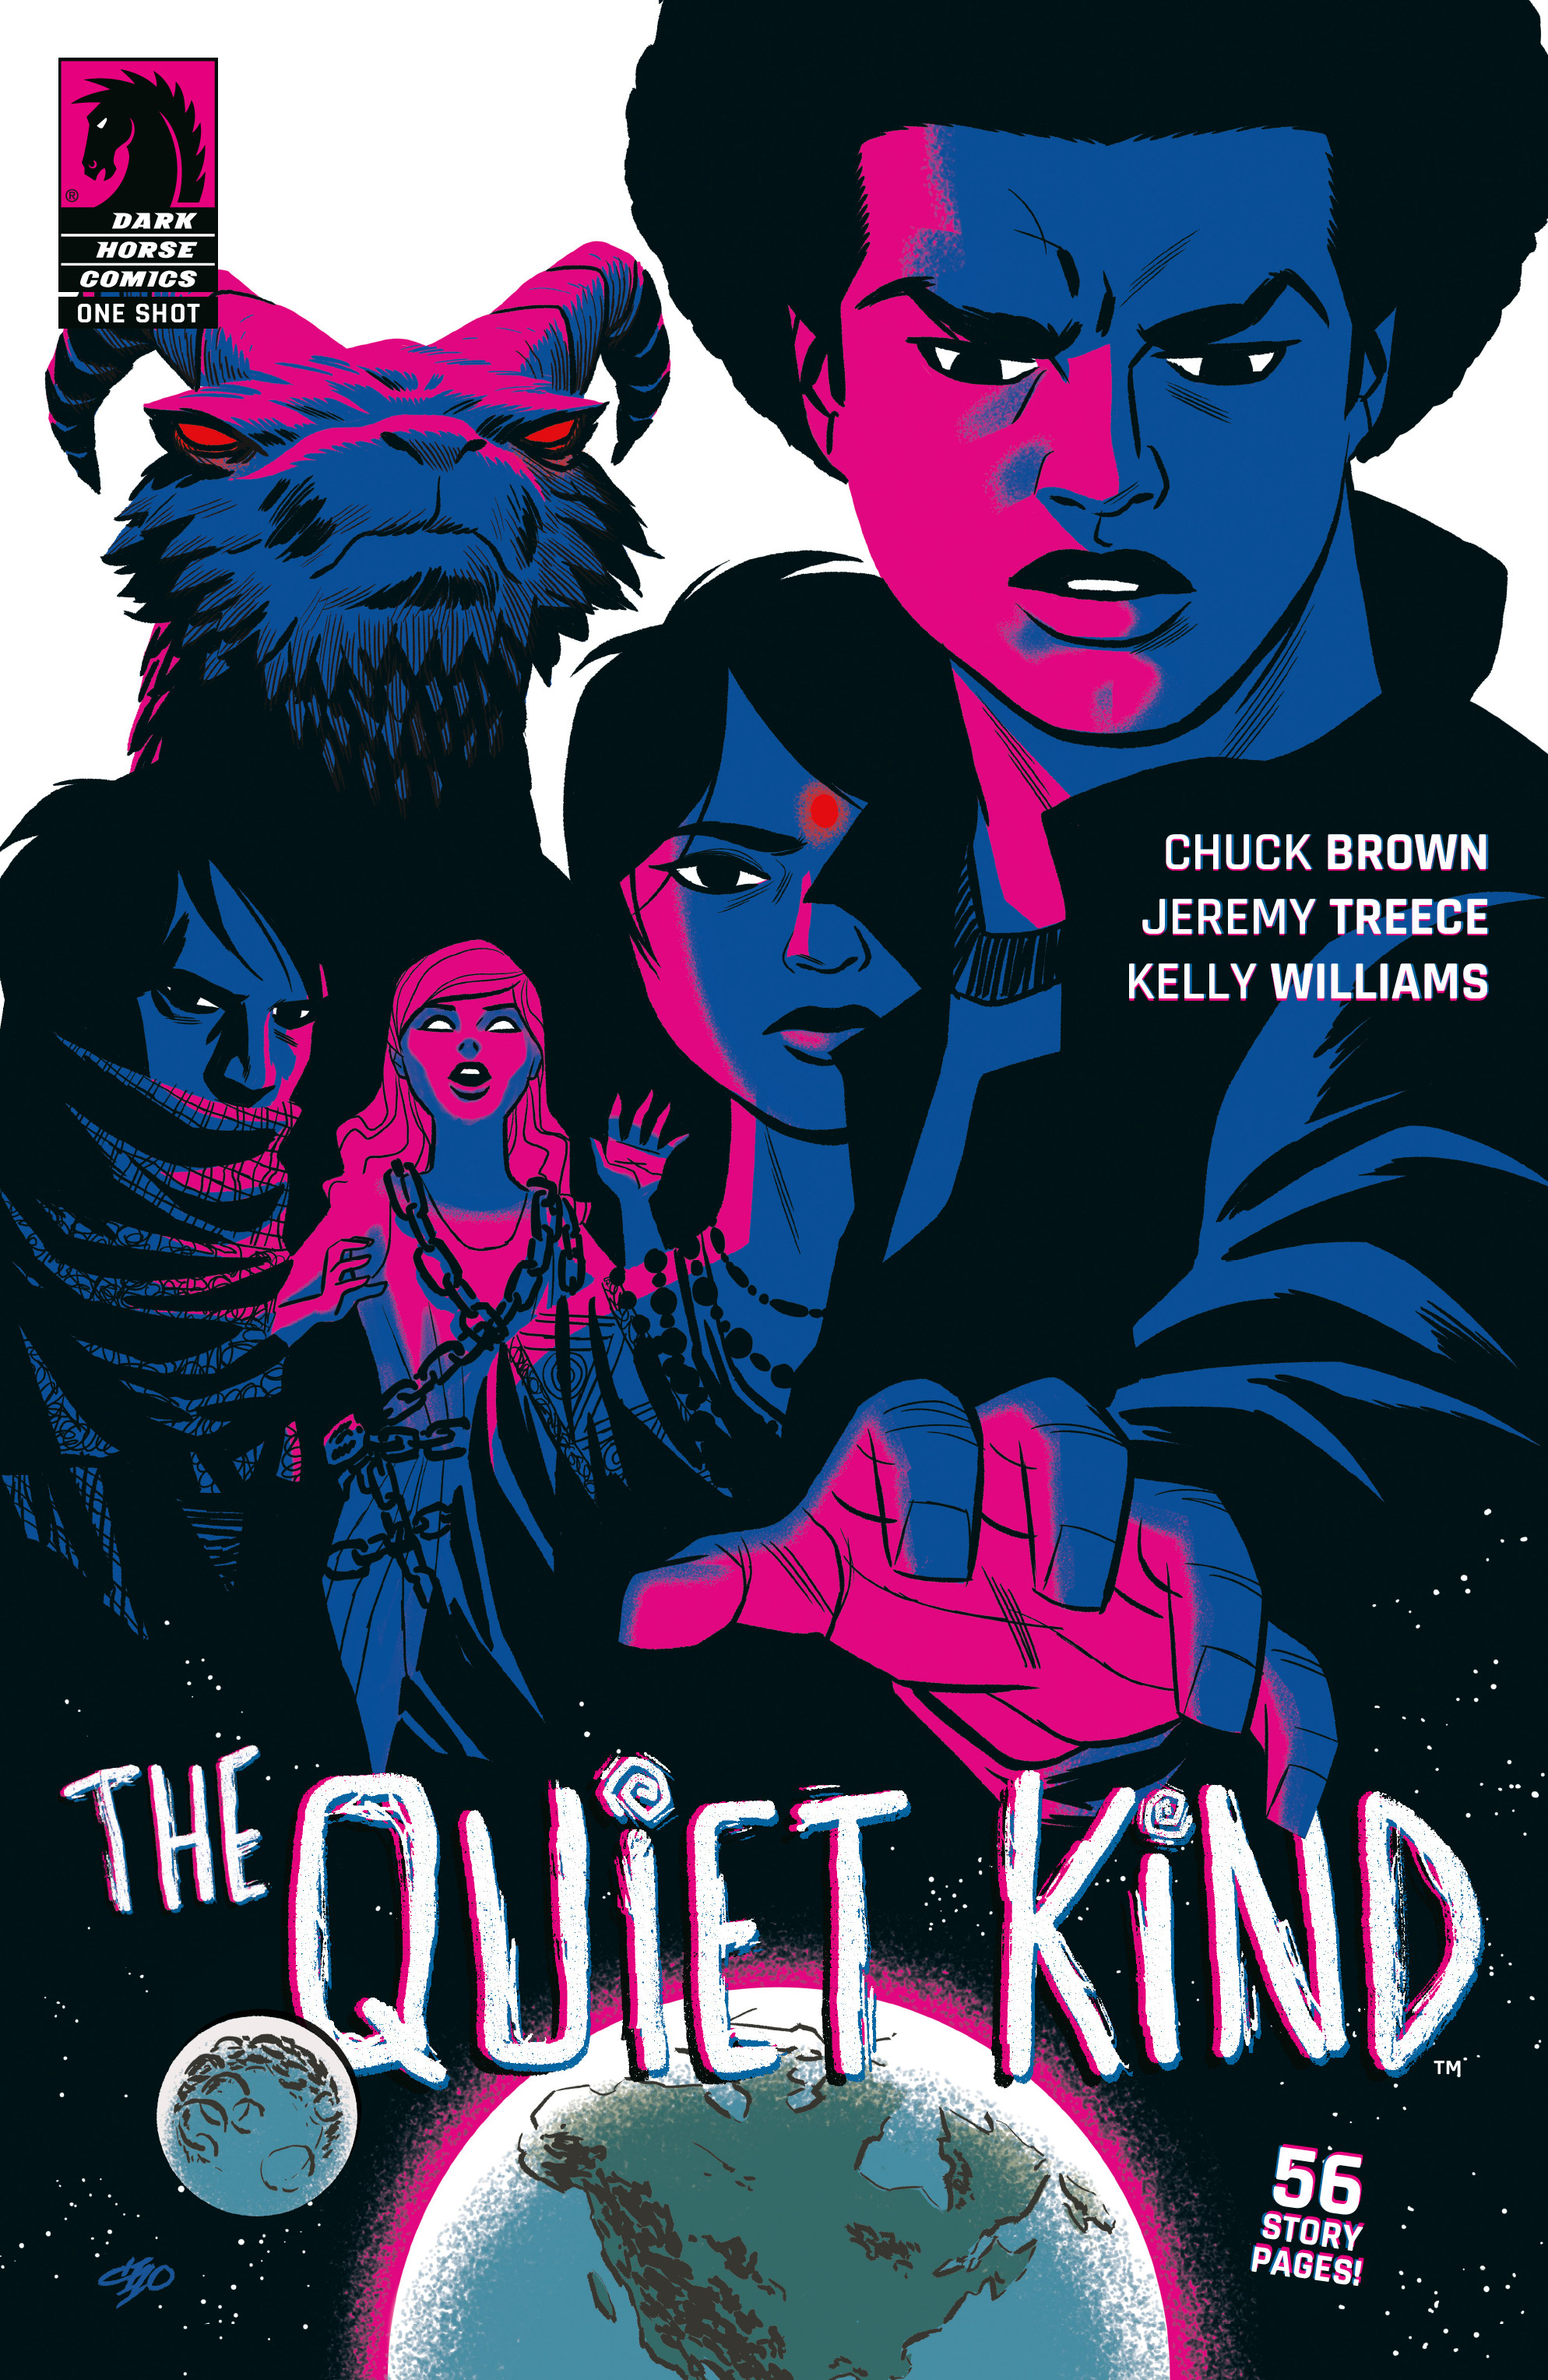 Read online The Quiet Kind comic -  Issue # Full - 1